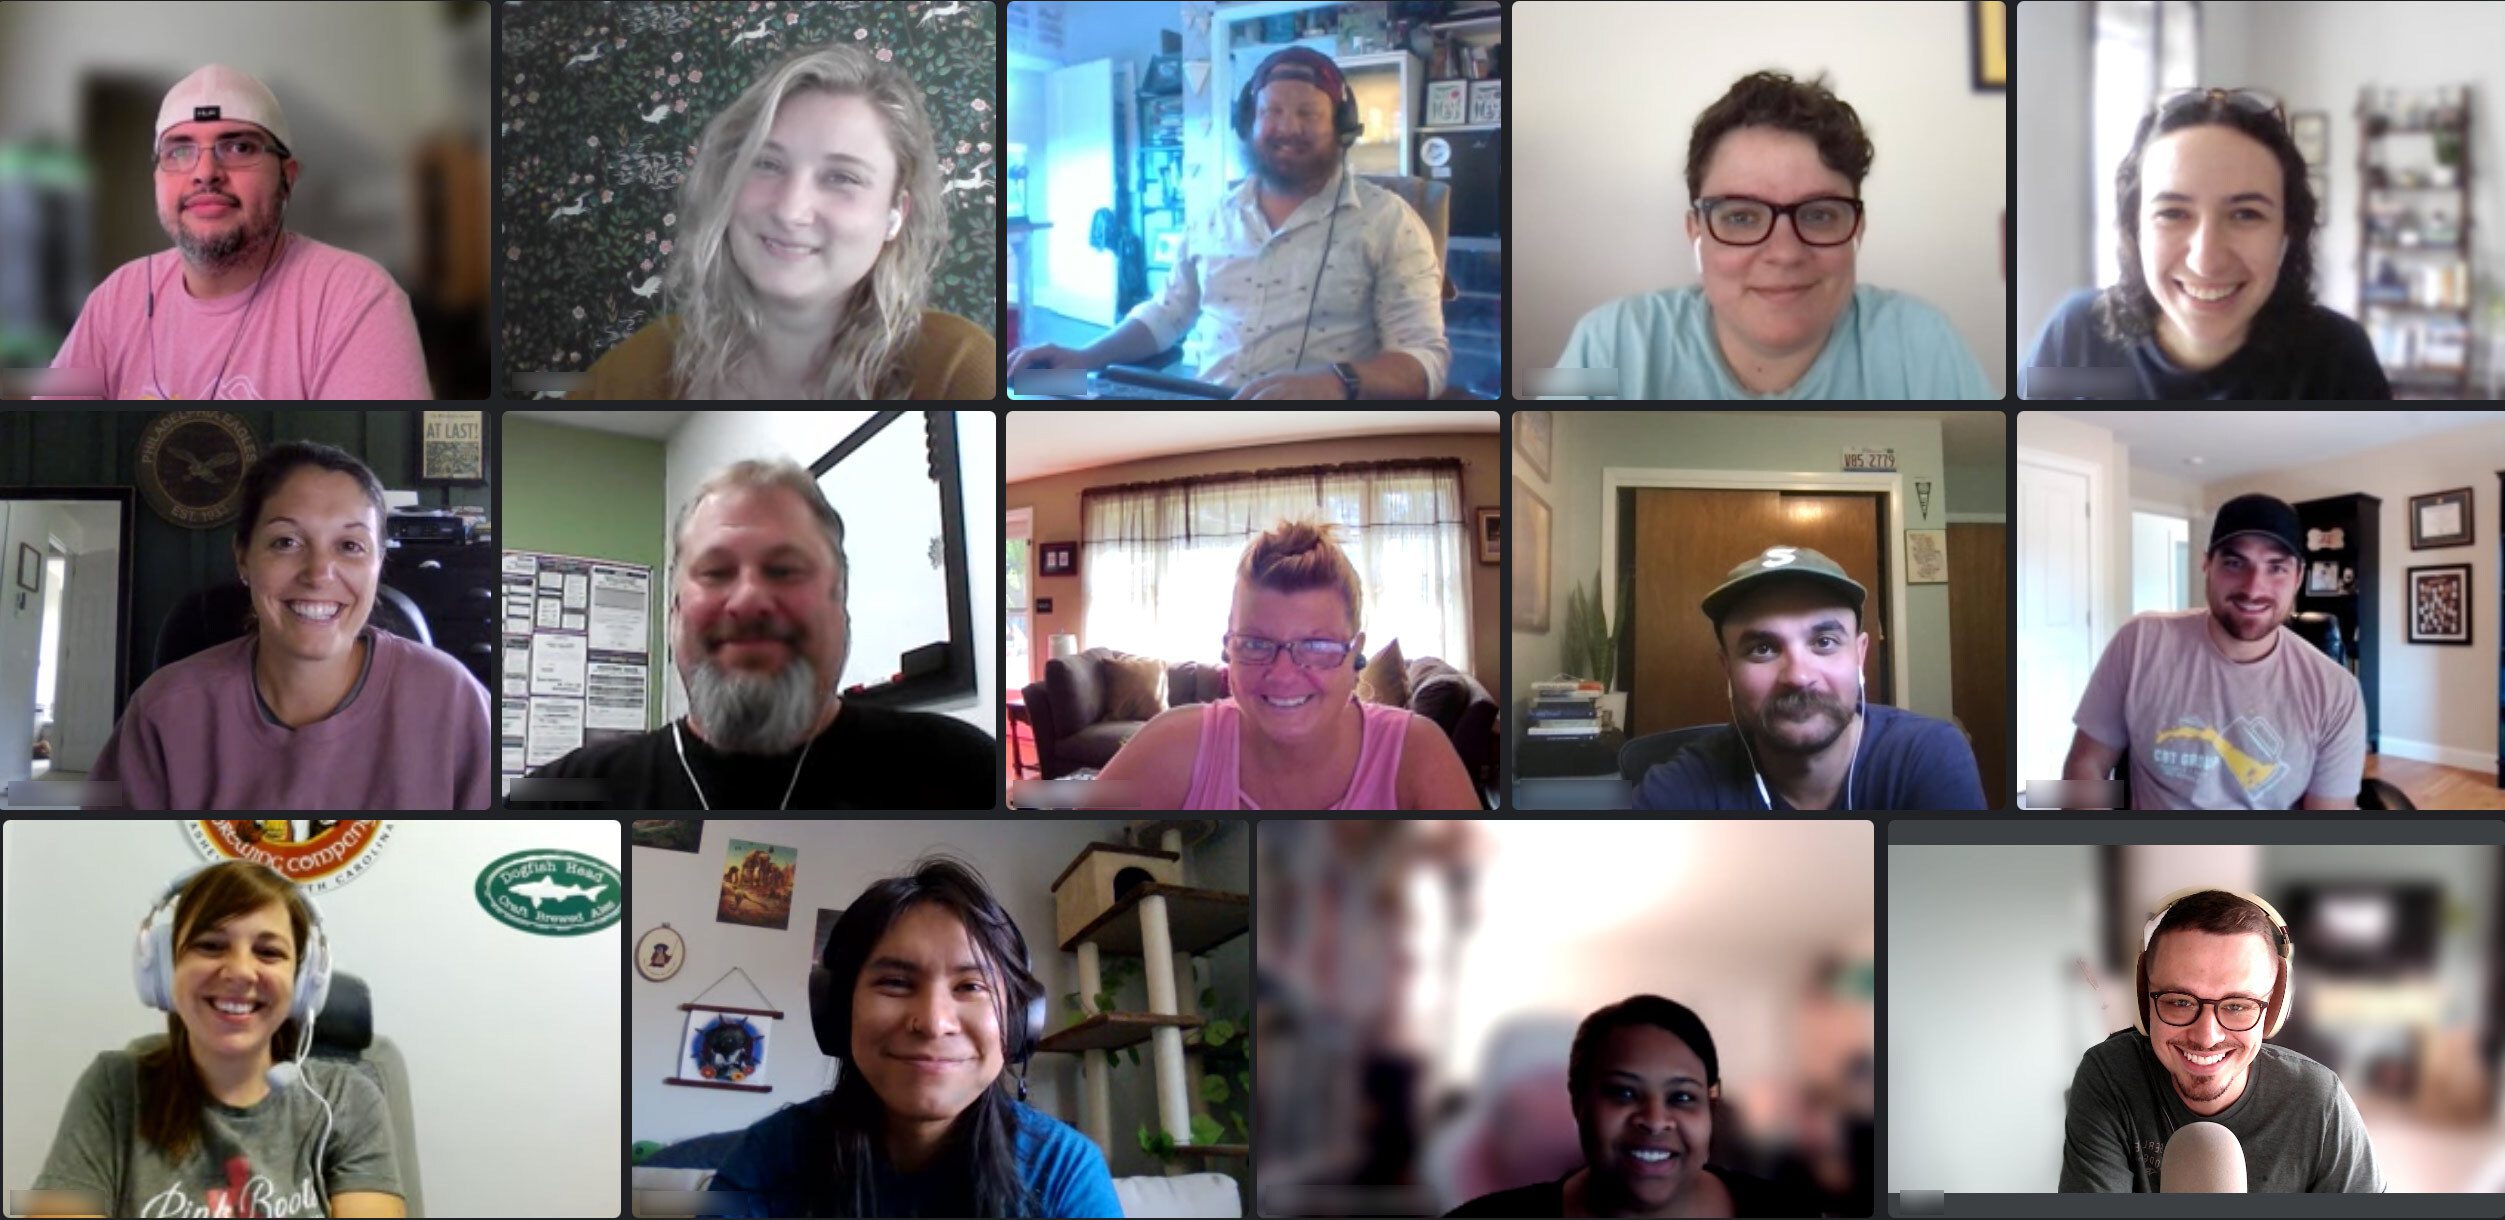 City Brew Tours' full-time crew work from home but meet up every morning to check in with one another!